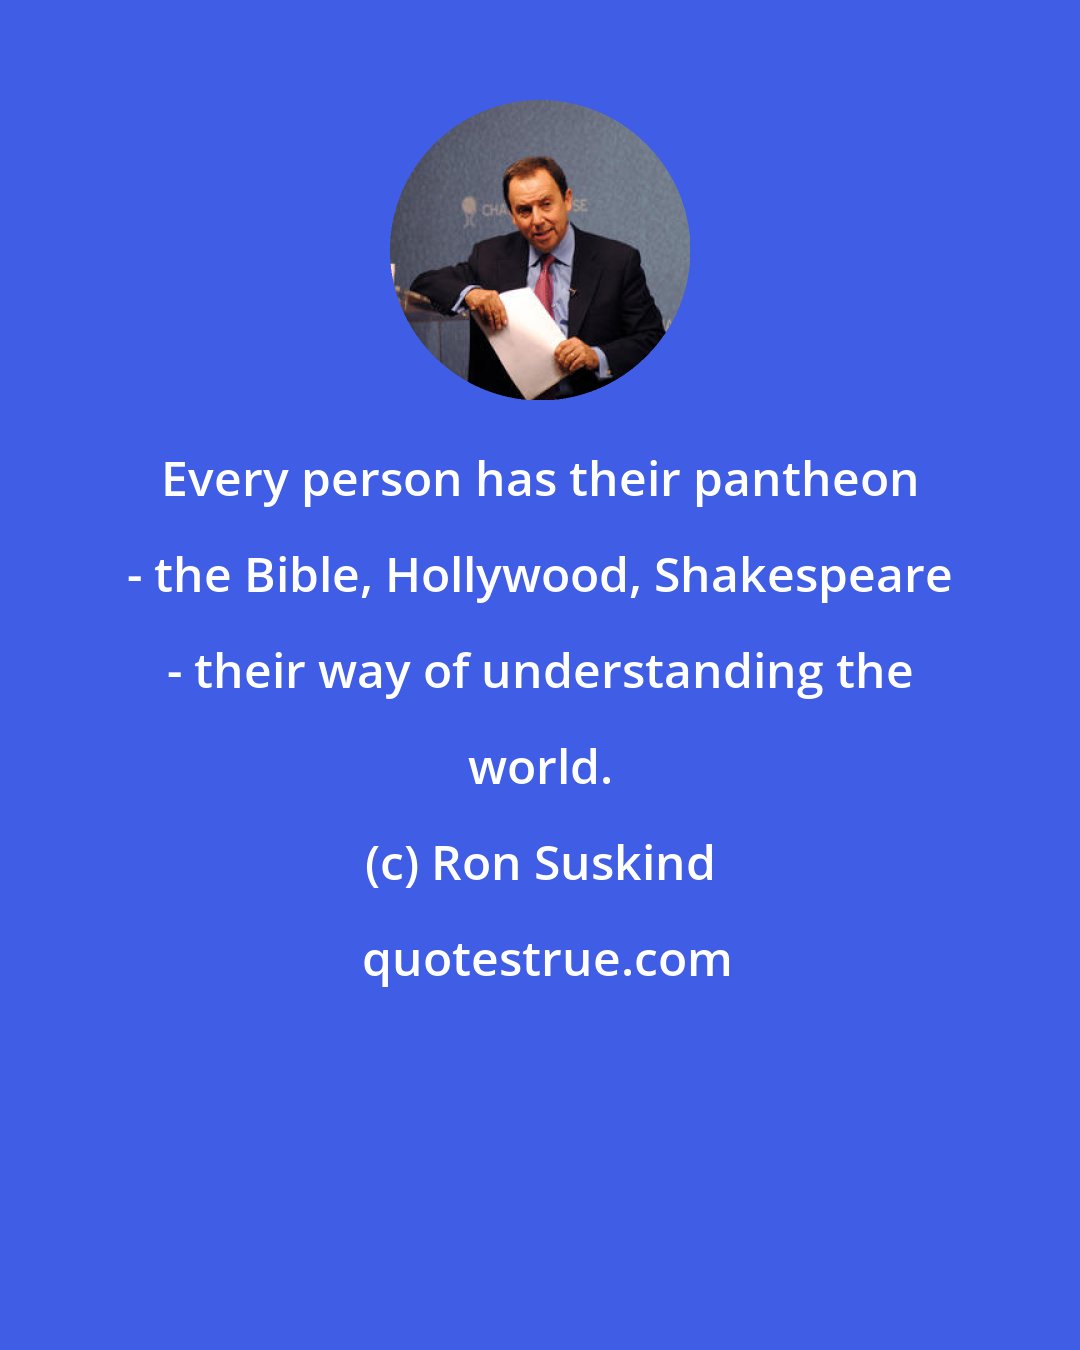 Ron Suskind: Every person has their pantheon - the Bible, Hollywood, Shakespeare - their way of understanding the world.